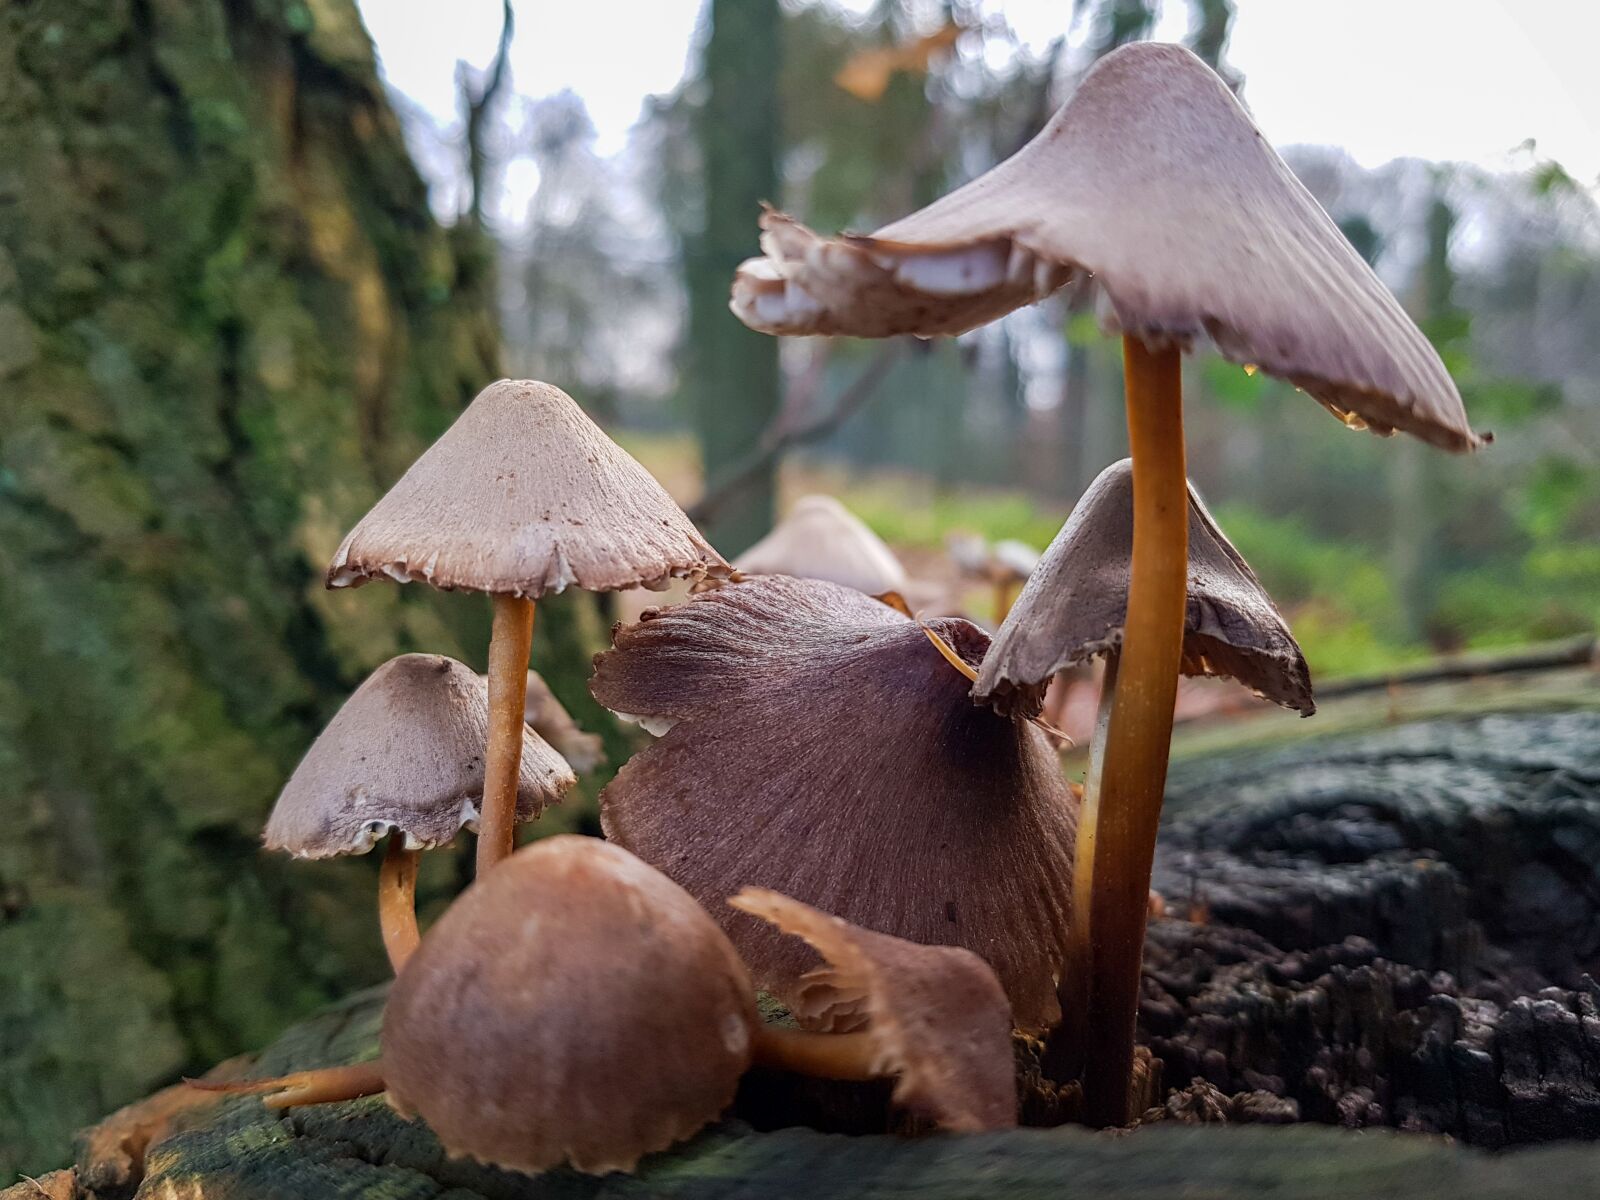 Samsung Galaxy S7 Rear Camera sample photo. Mushrooms, forest, nature photography